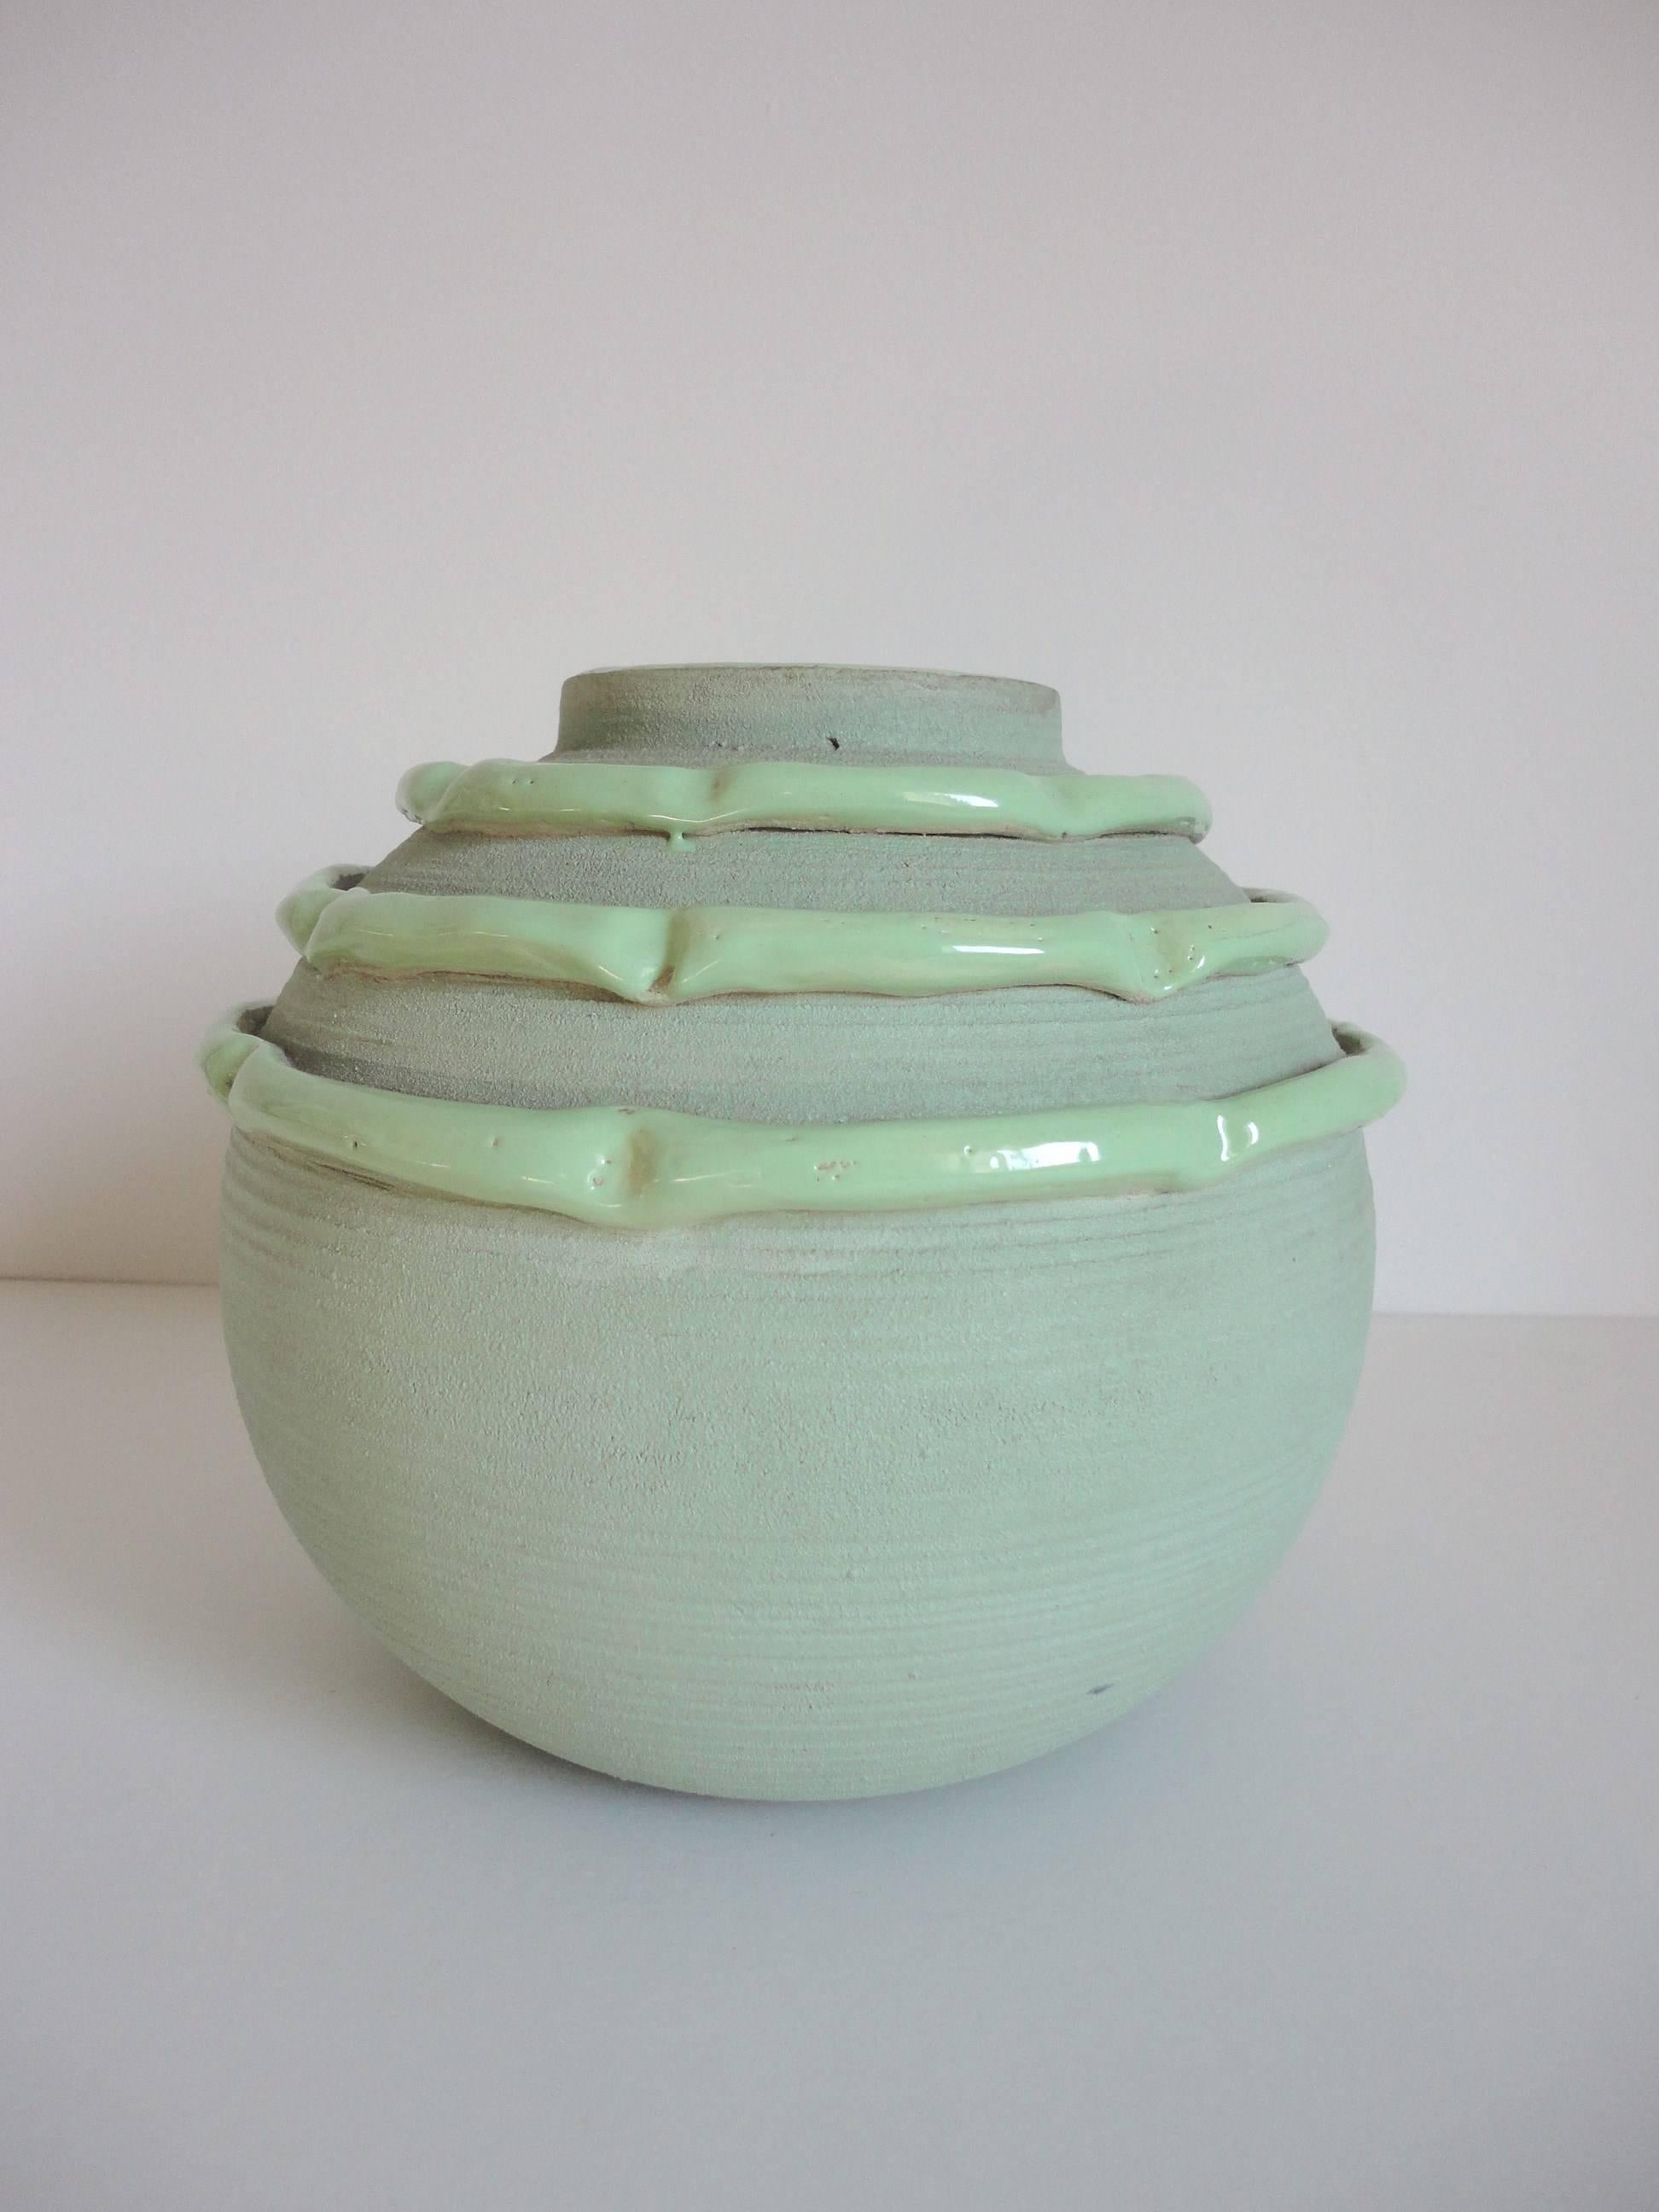 Ceramic vase by Luc Lanel, circa 1940, in light green with a matte and gloss finish.
It is signed 'M Luc Lanel'.
Luc Lanel is widely known for his collaboration with Christofle in the 1920s and 1930s where he worked as artistic director. His wife,